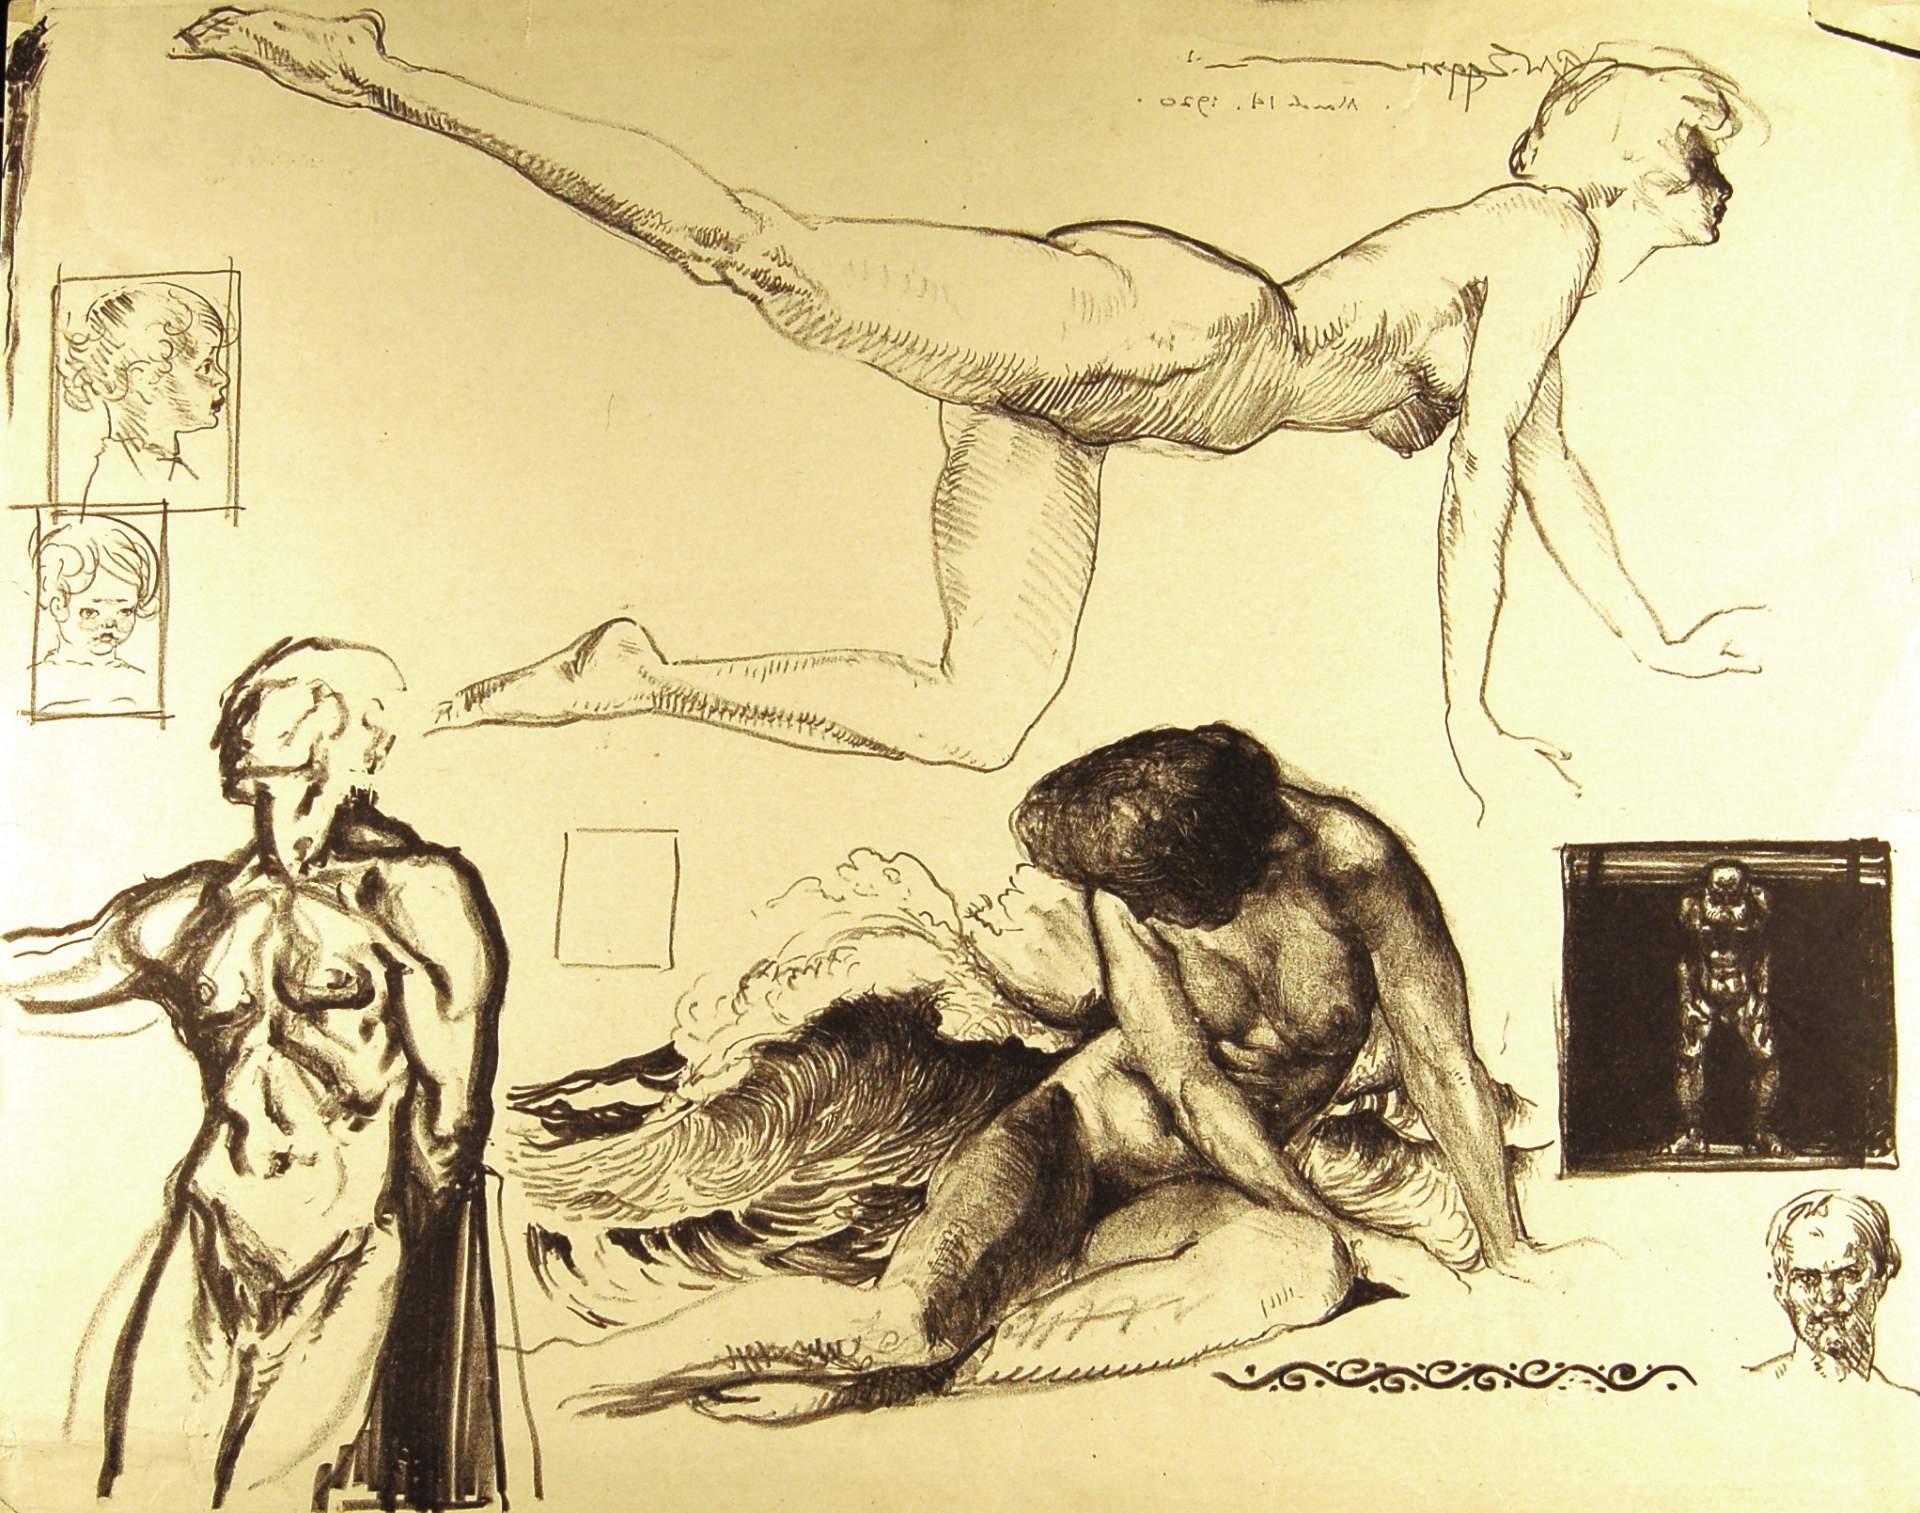 Sketches of Figures